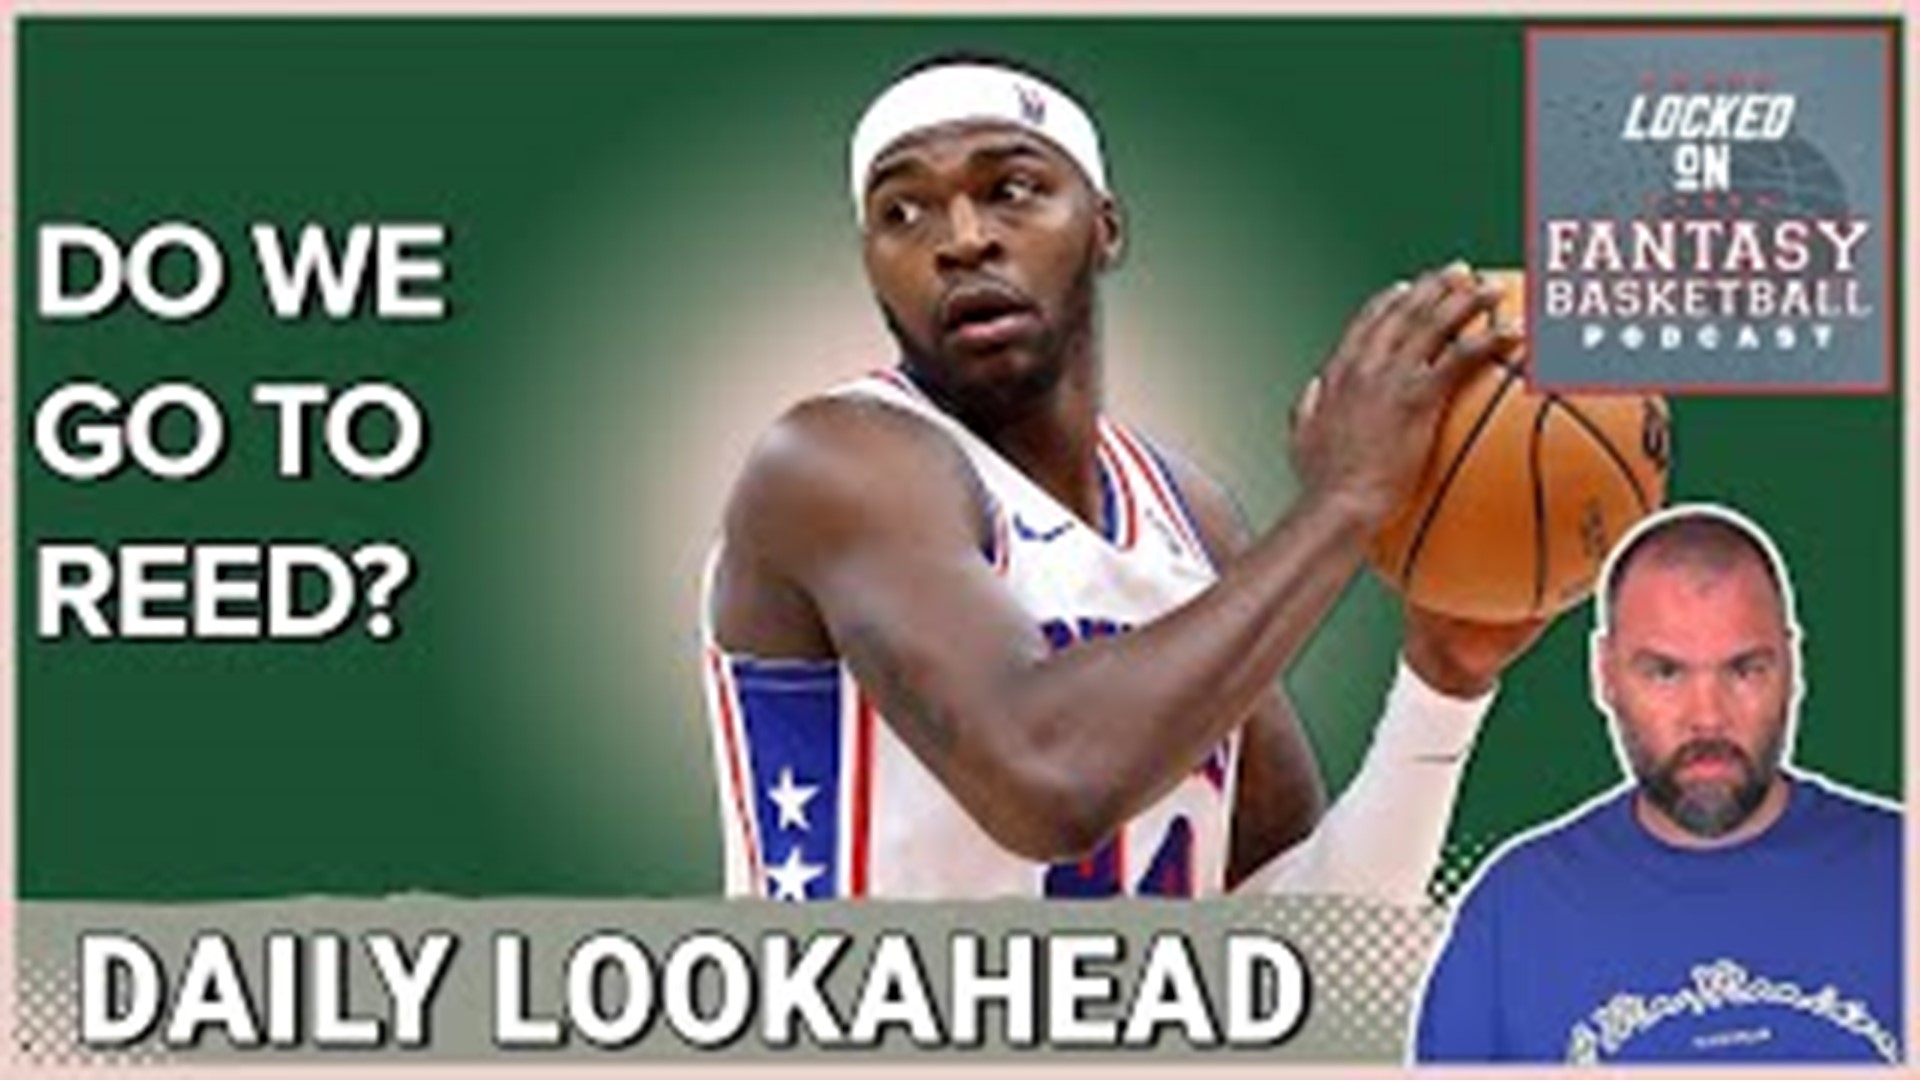 Join Josh Lloyd for a comprehensive preview of Friday's NBA games in this episode of NBA Fantasy Basketball. We'll examine Paul Reed's potential in Embiid's absence.